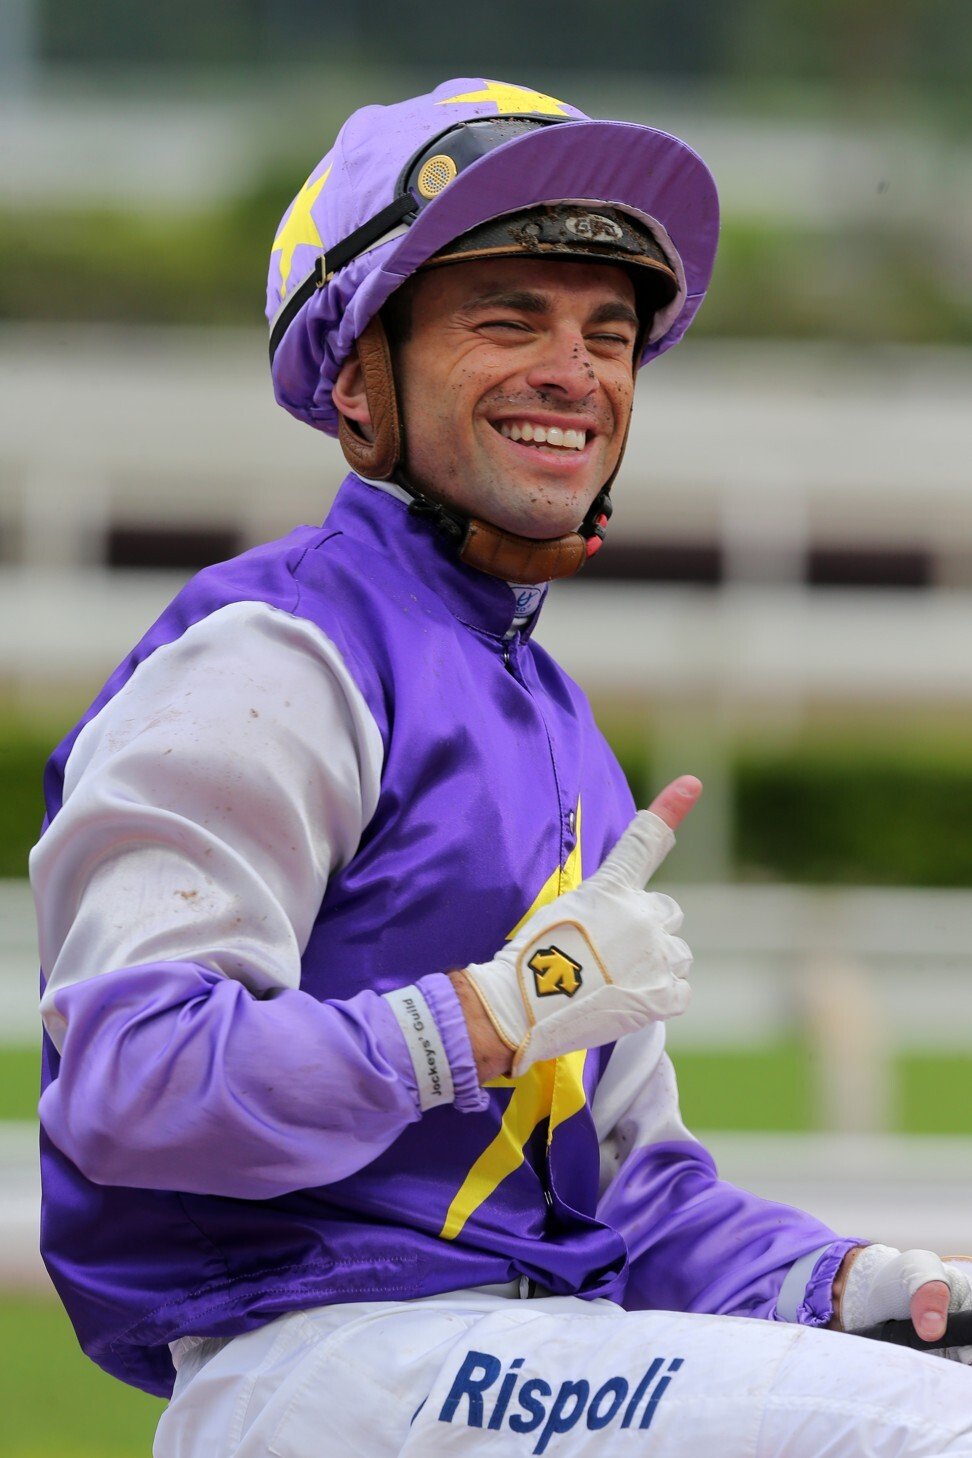 Umberto Rispoli is loving his lifestyle in the United States.